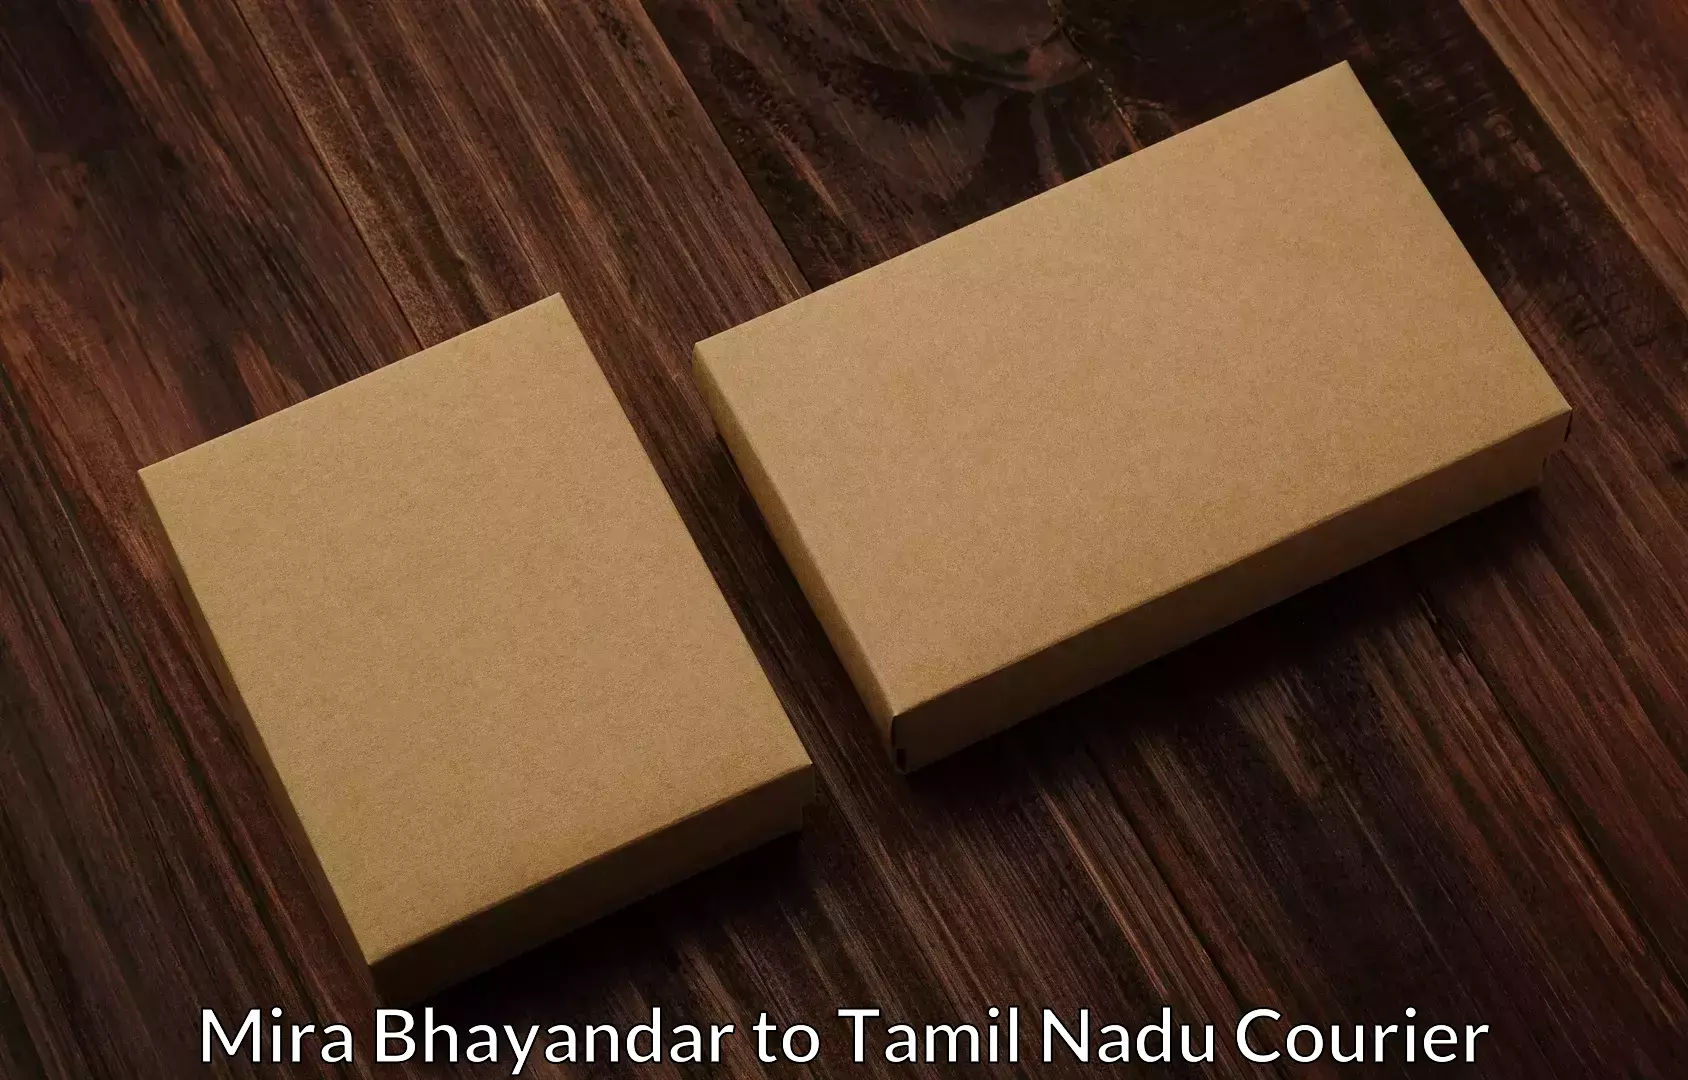 Furniture delivery service Mira Bhayandar to Trichy